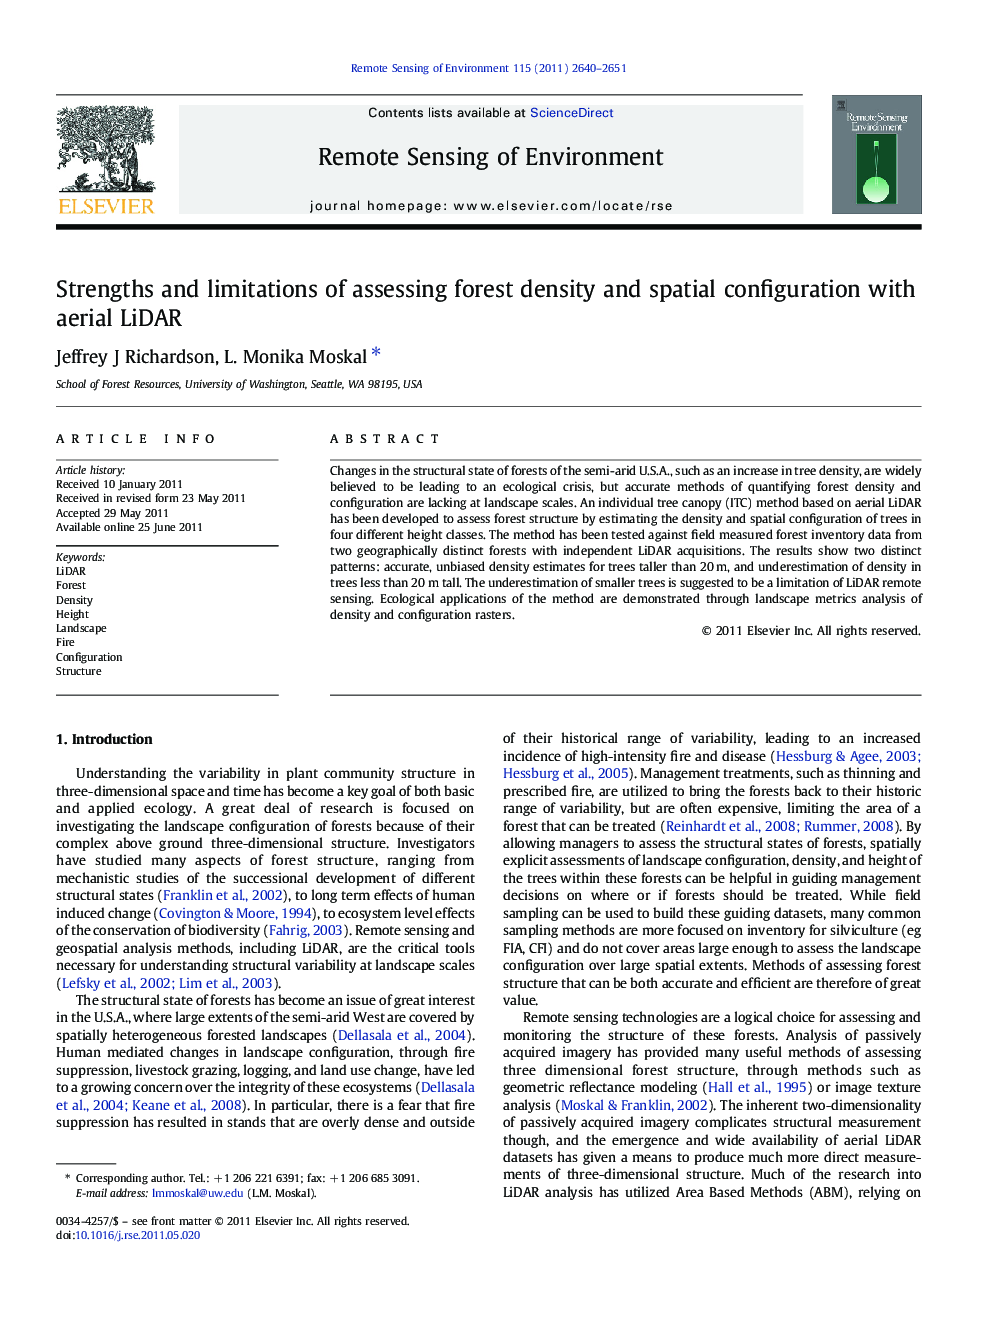 Strengths and limitations of assessing forest density and spatial configuration with aerial LiDAR